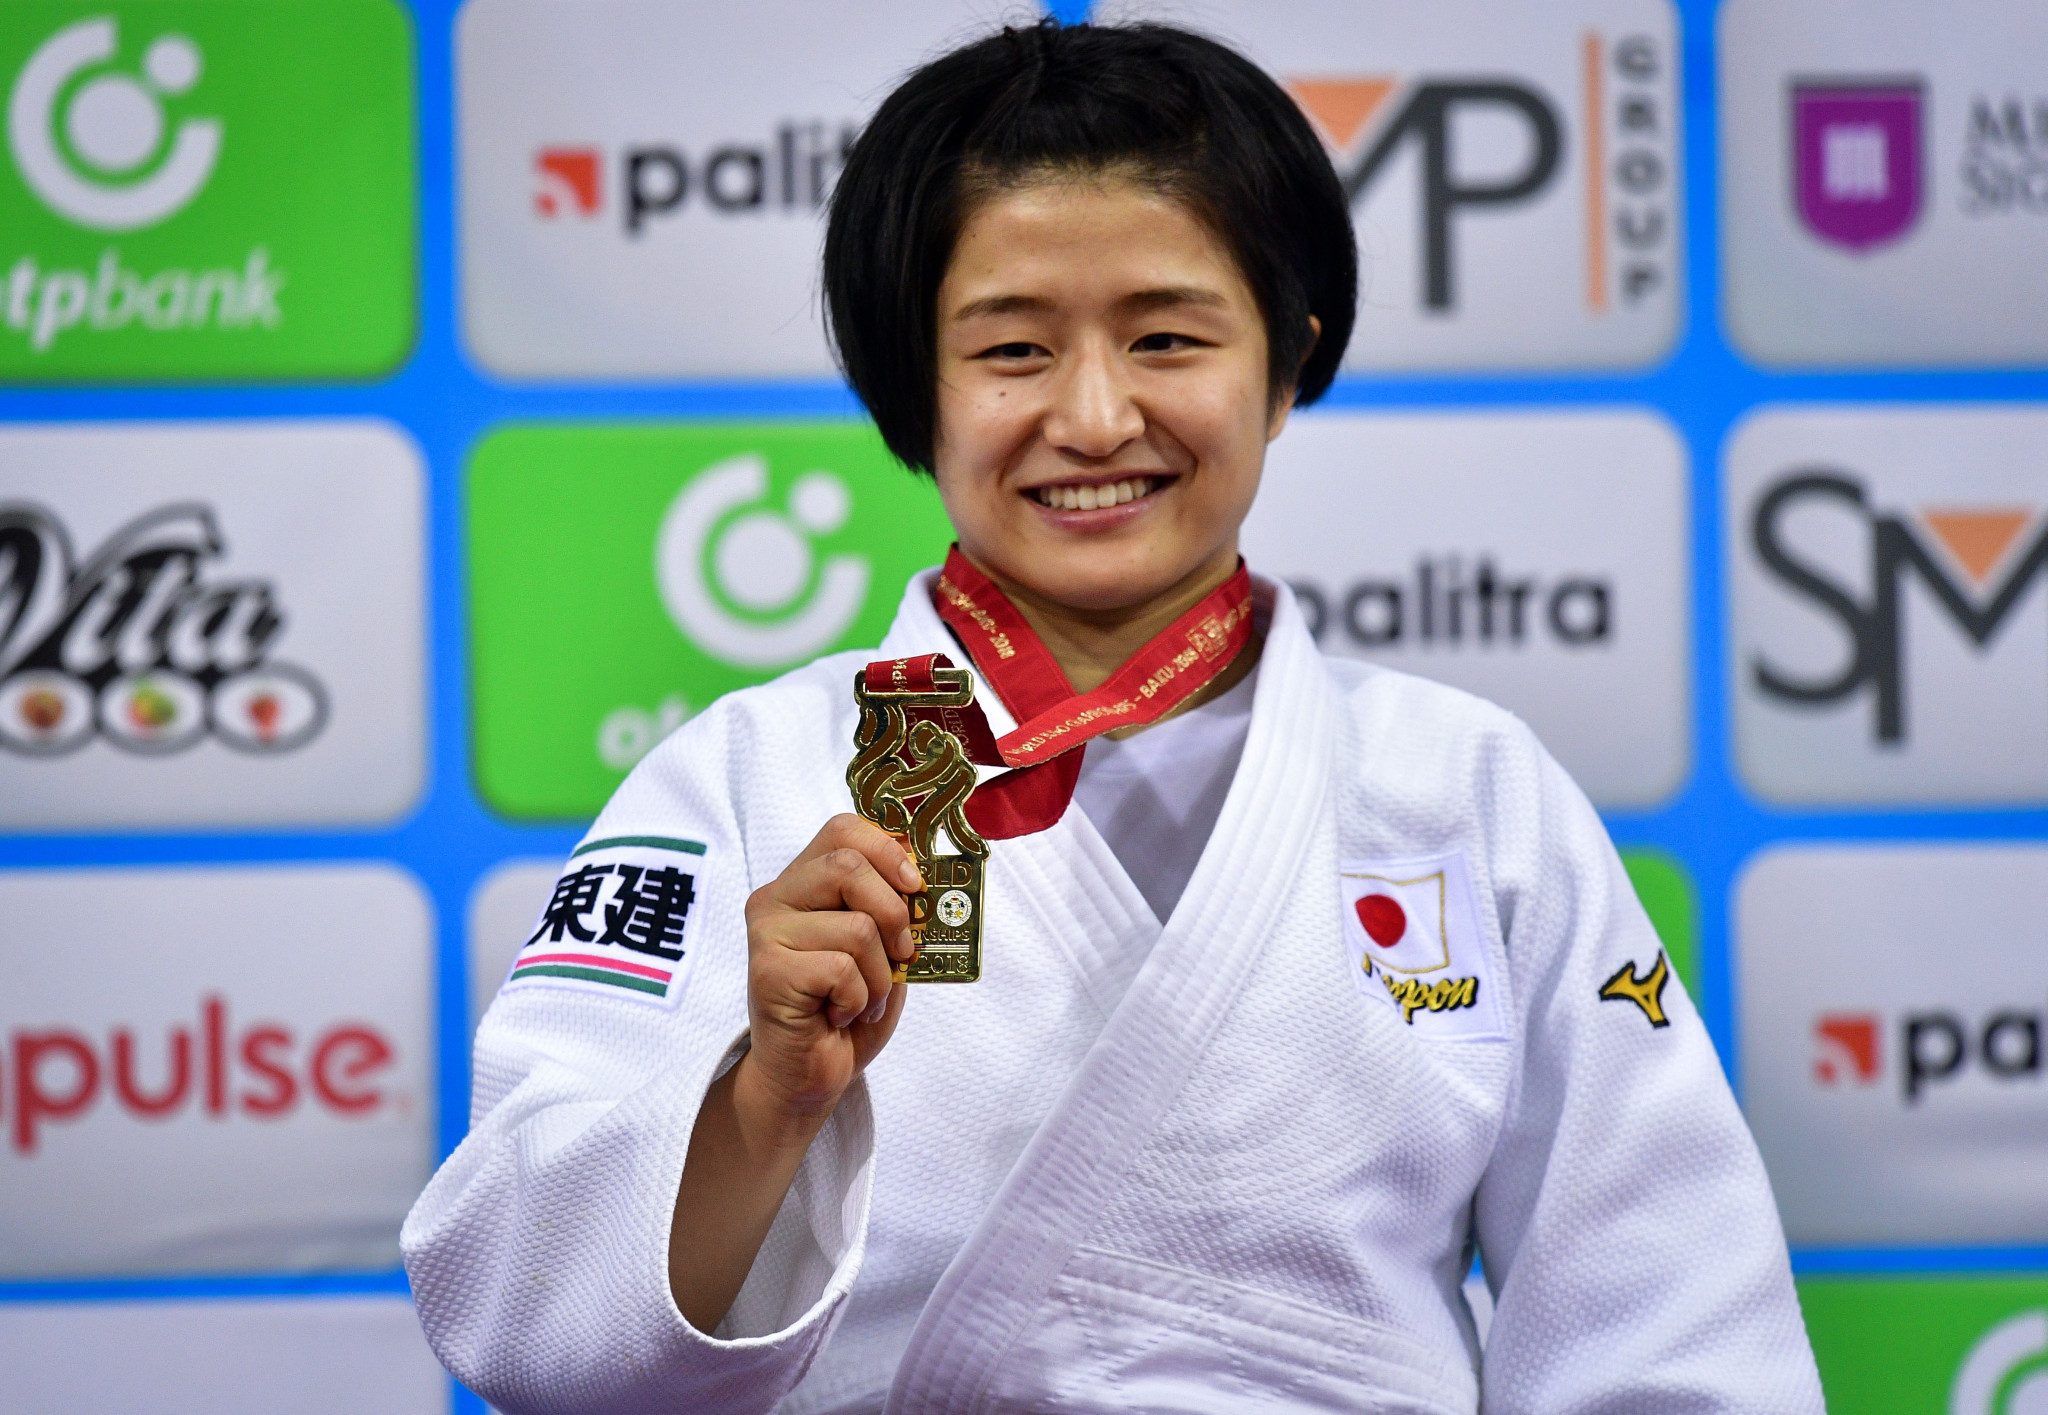 Japan's Tsukasa Yoshida upgrades her silver from last year to gold in Baku ©Getty Images